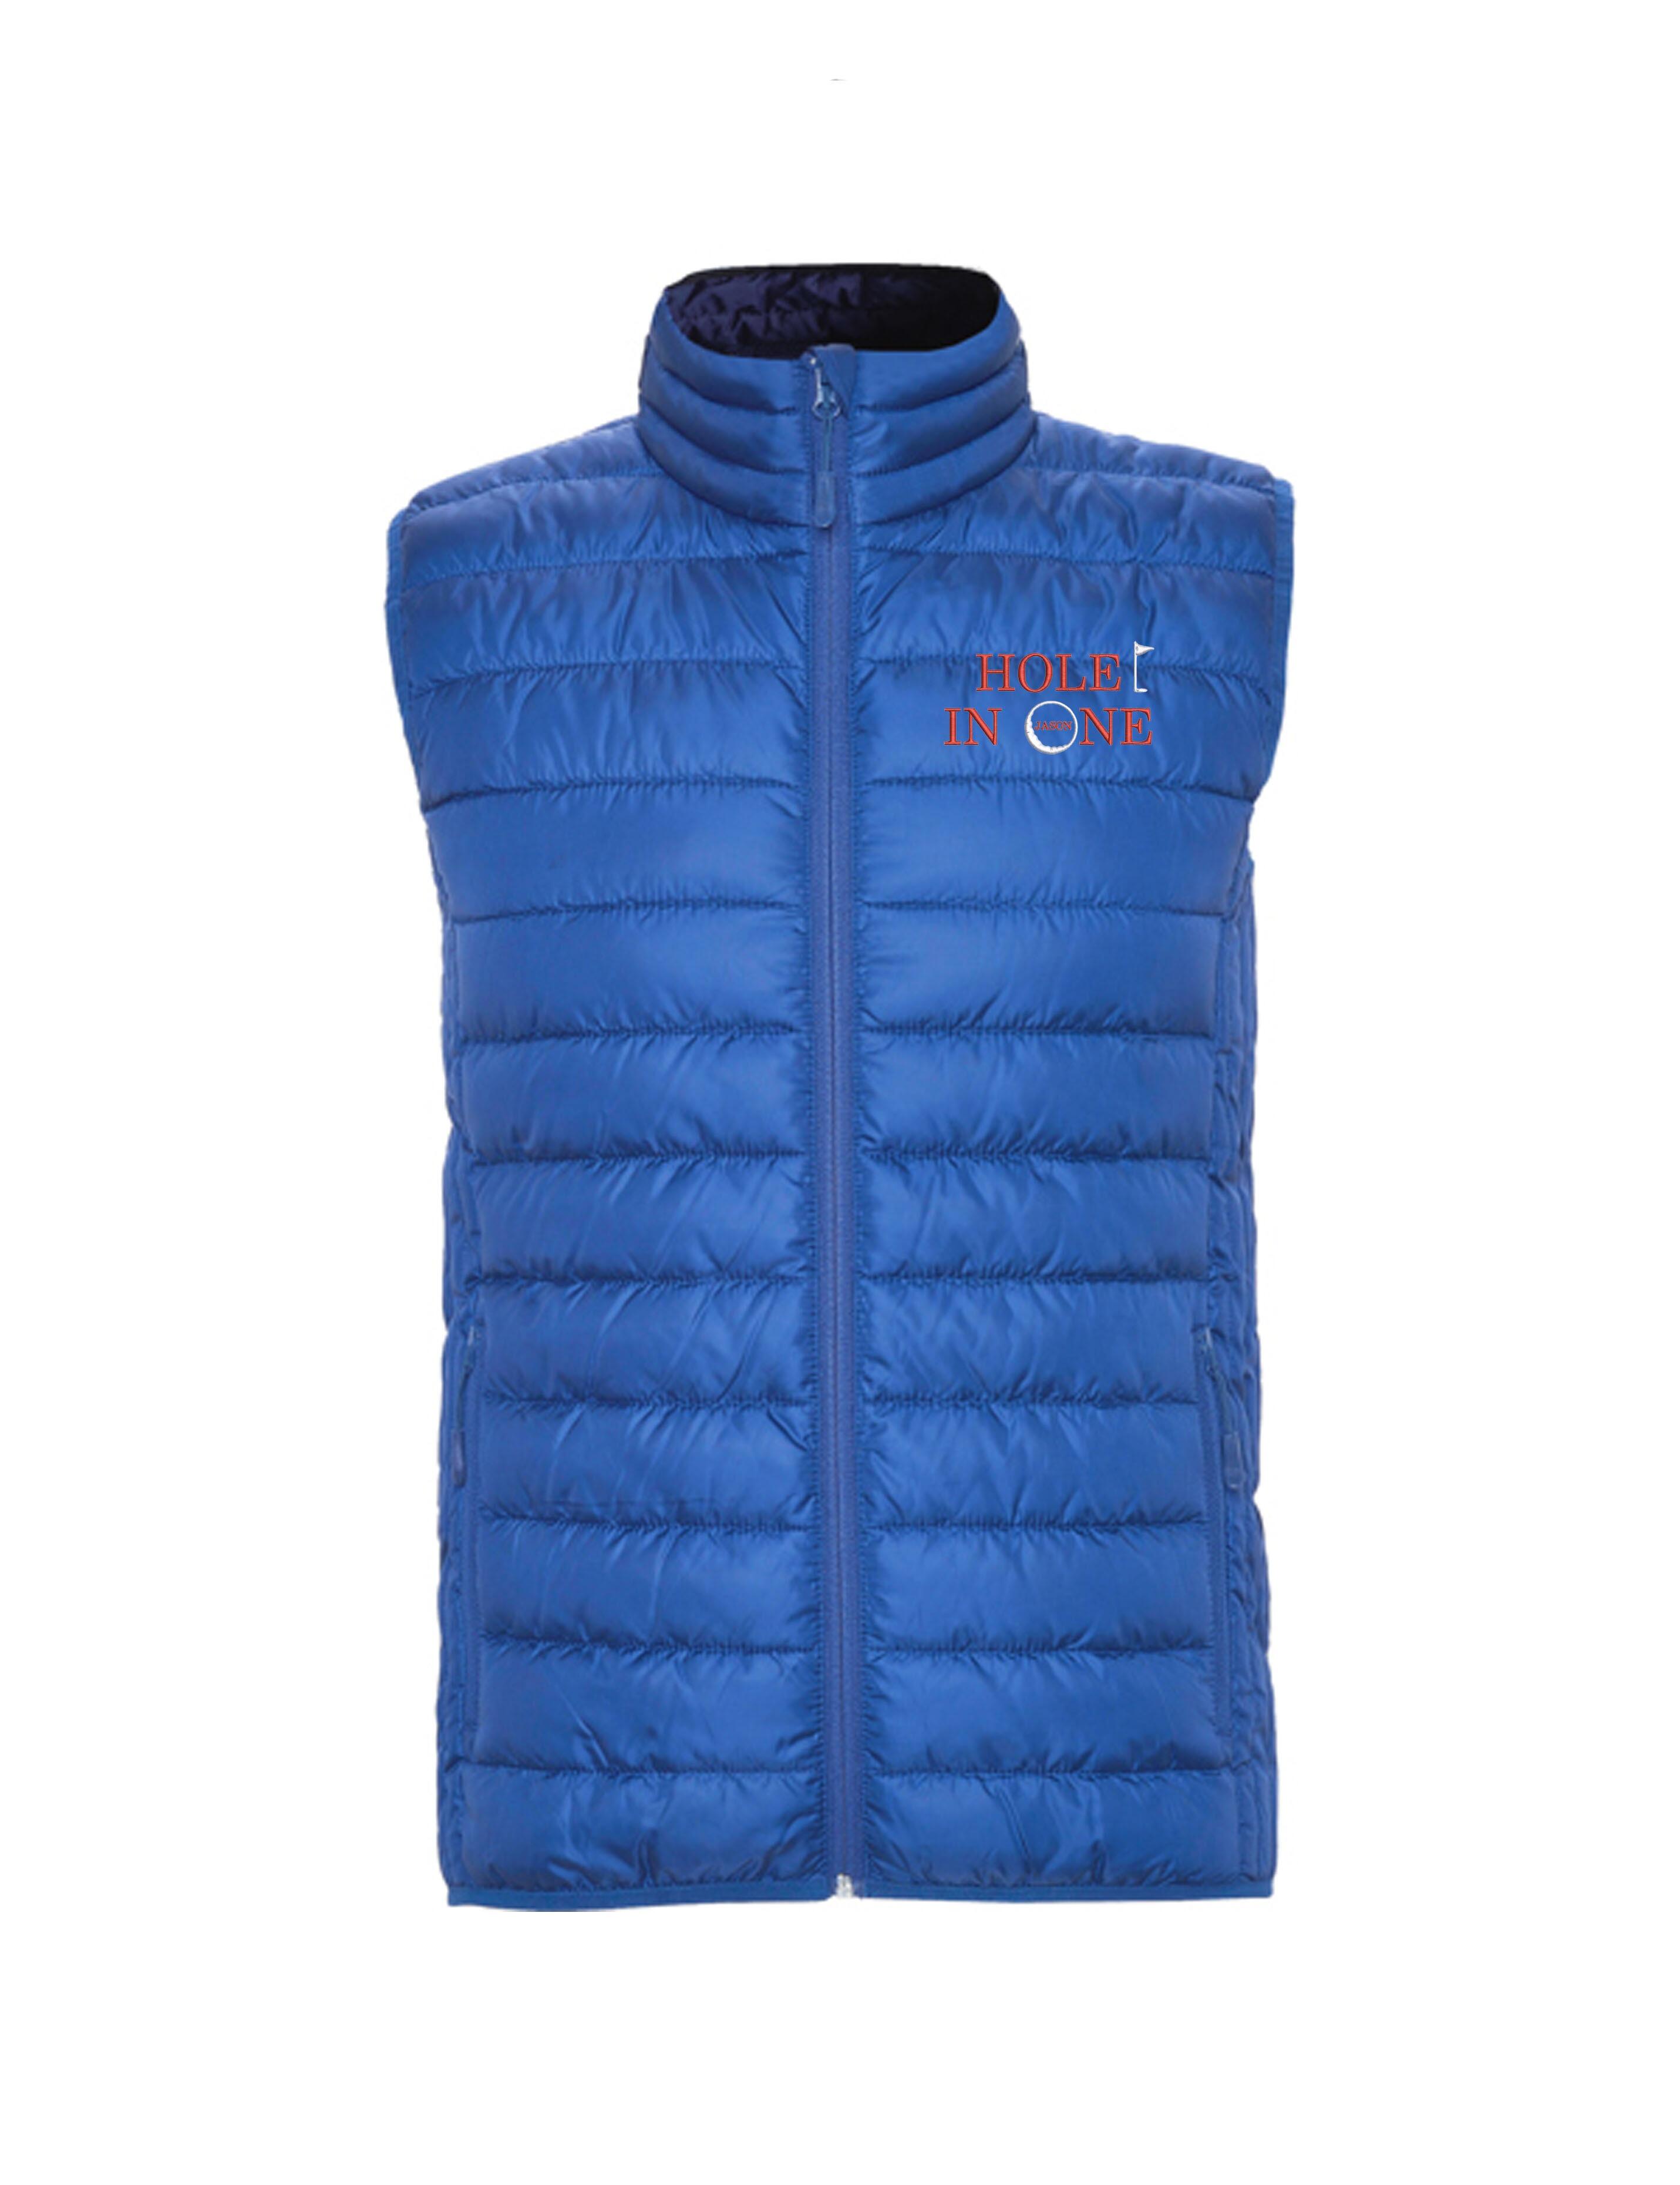 Hole in 1 Design Embroidered Feather Golf Gilet Royal Blue